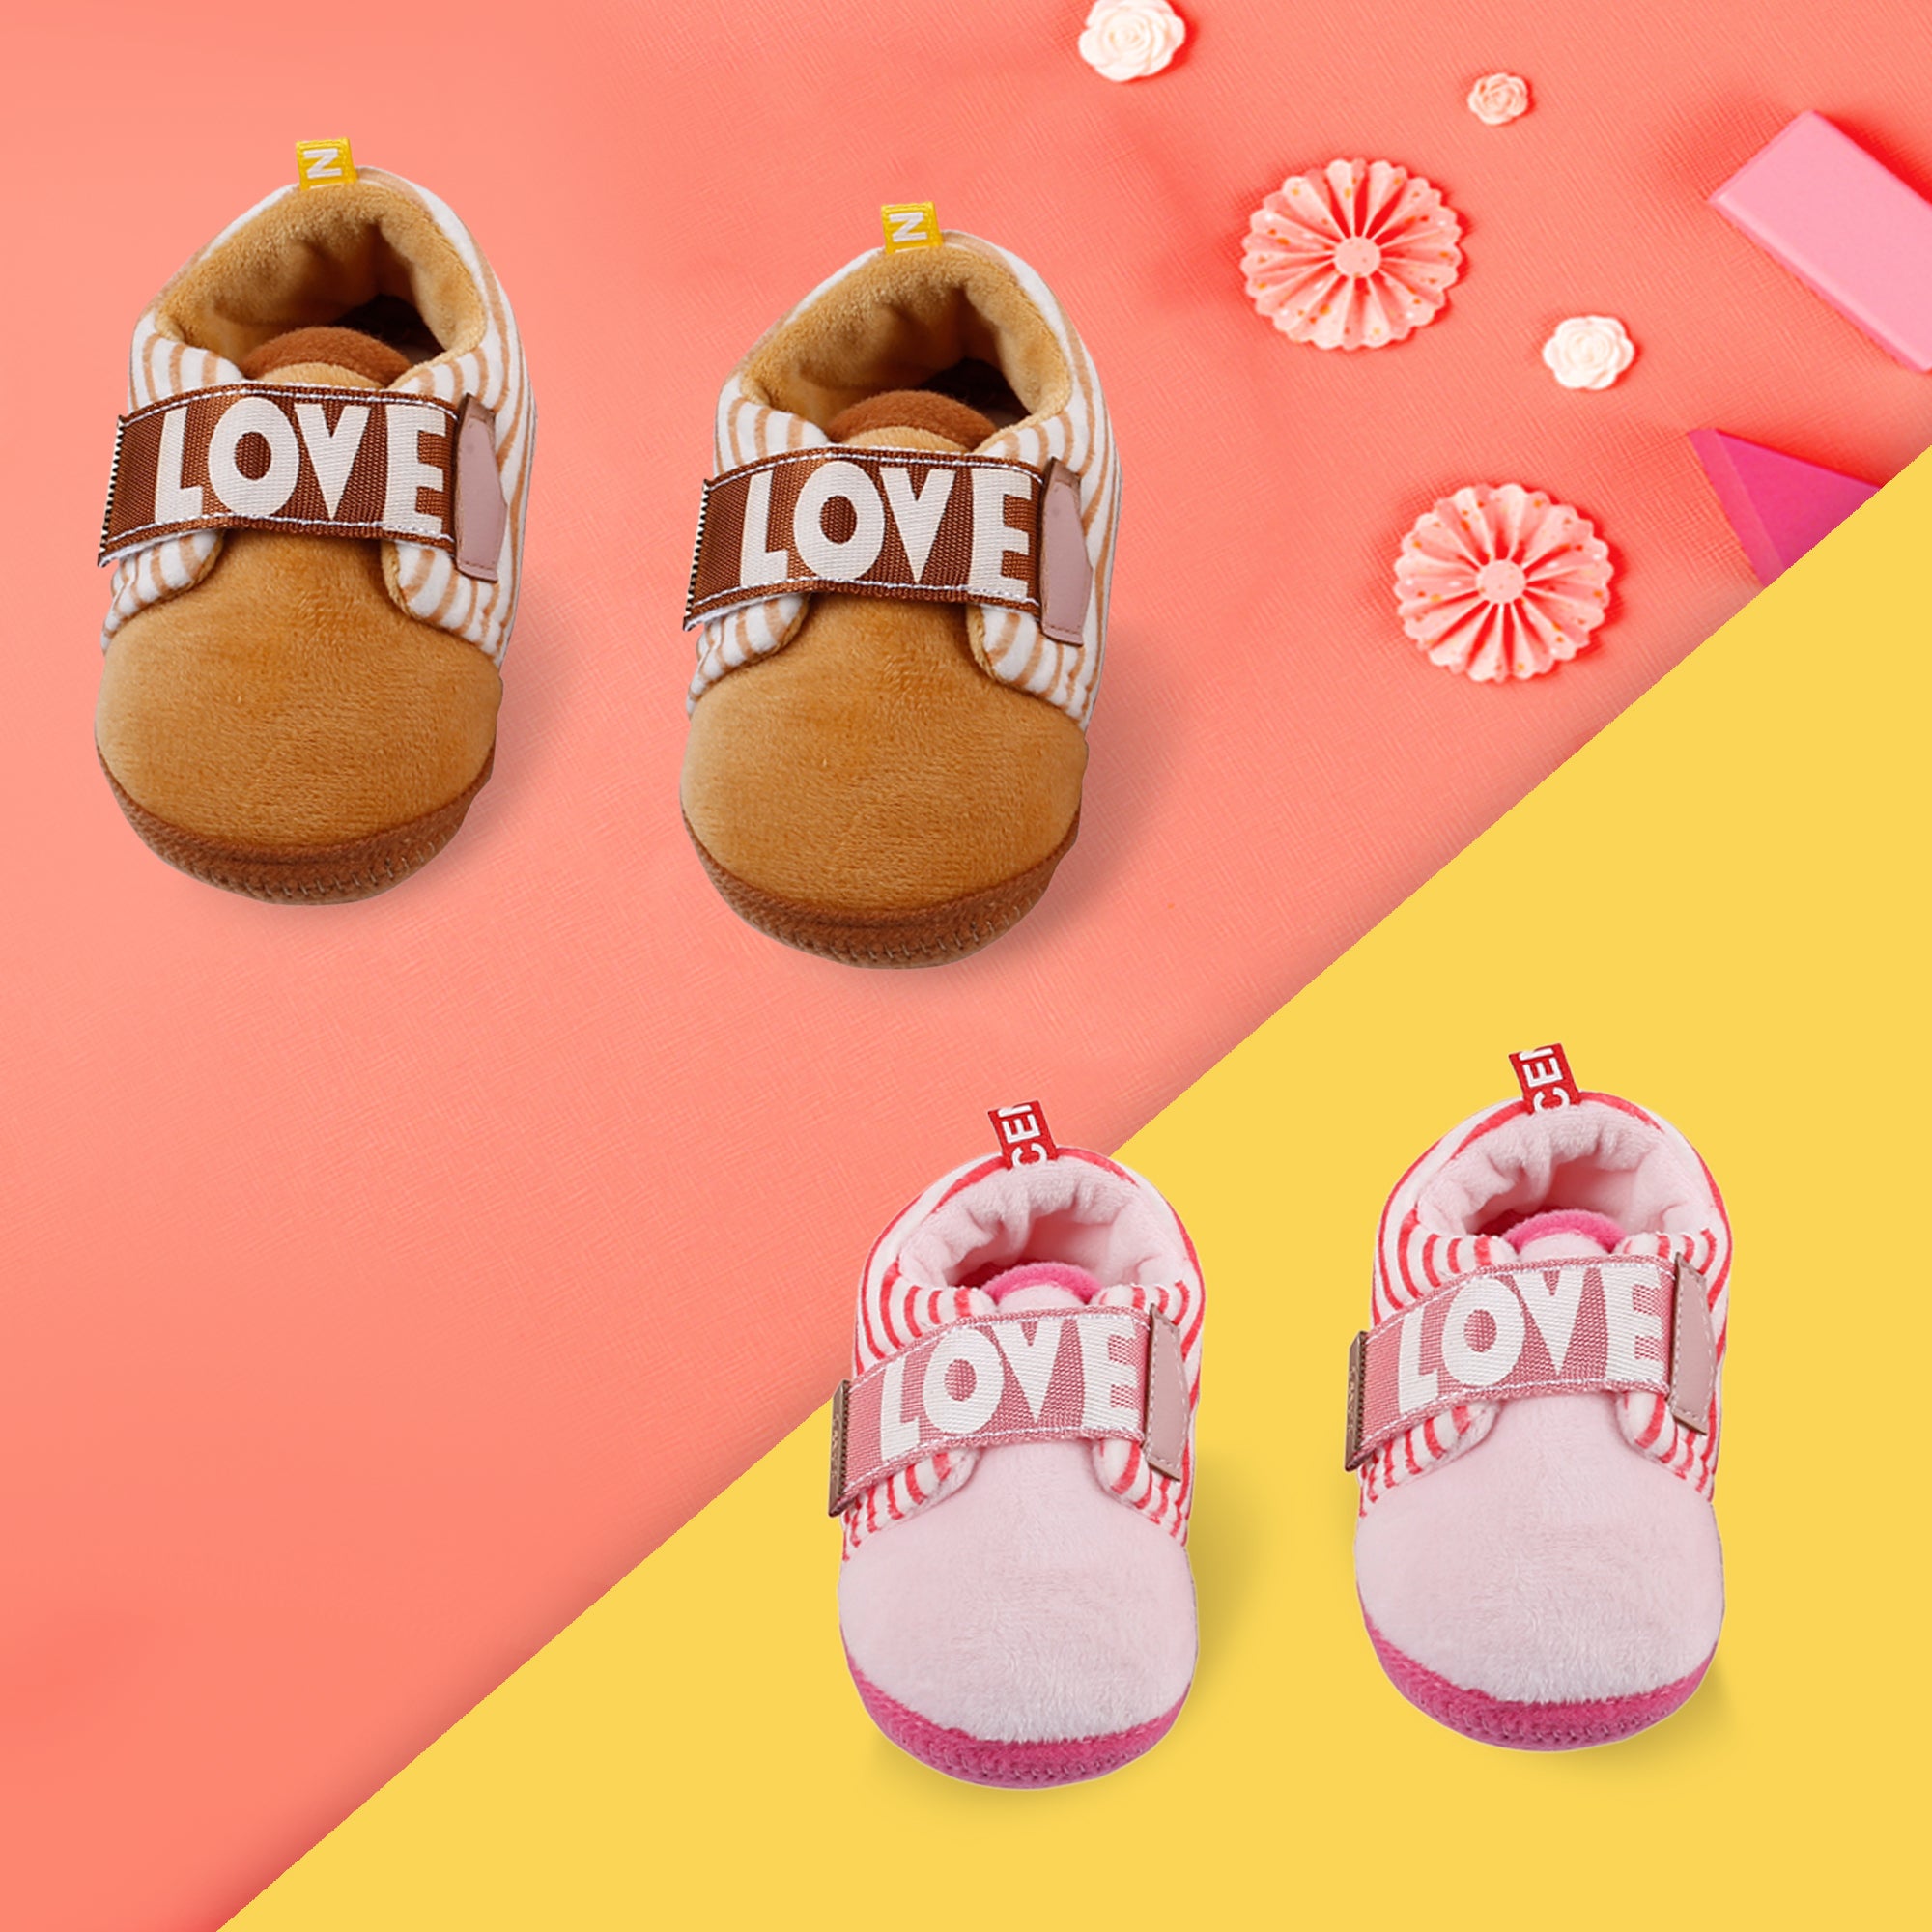 All About Love Brown And Pink 2 Pk Booties - Baby Moo